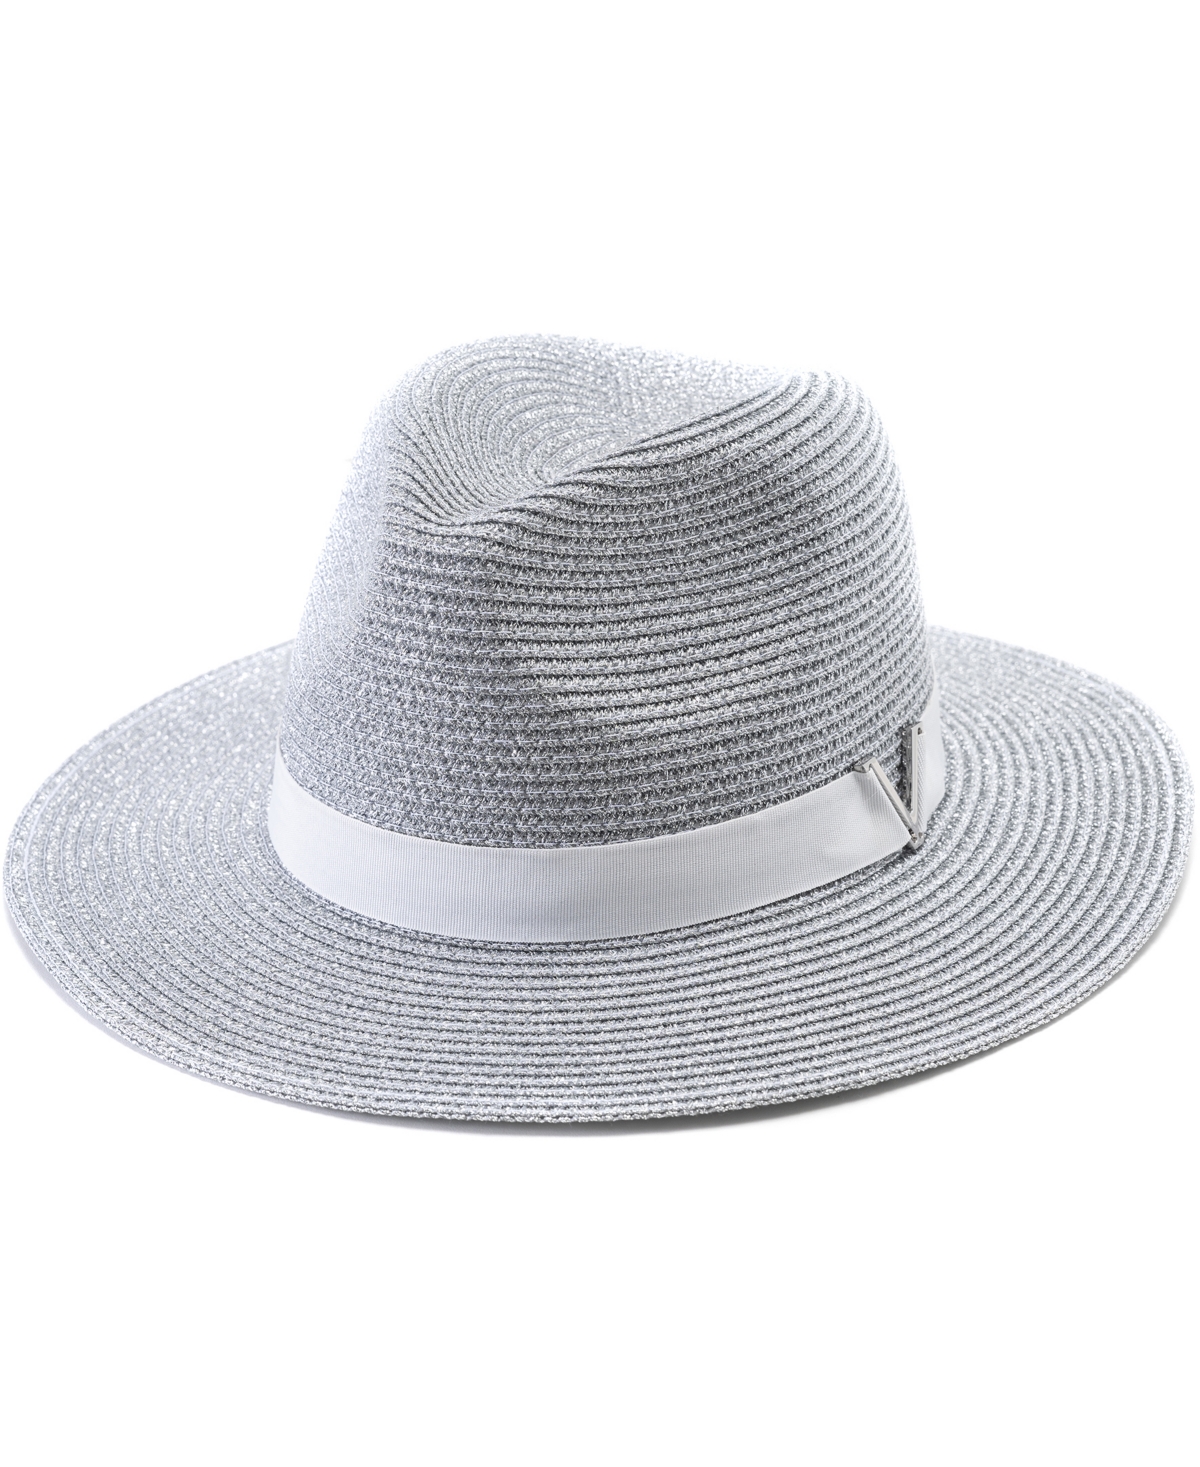 All Over Shine Panama Hat - Silver